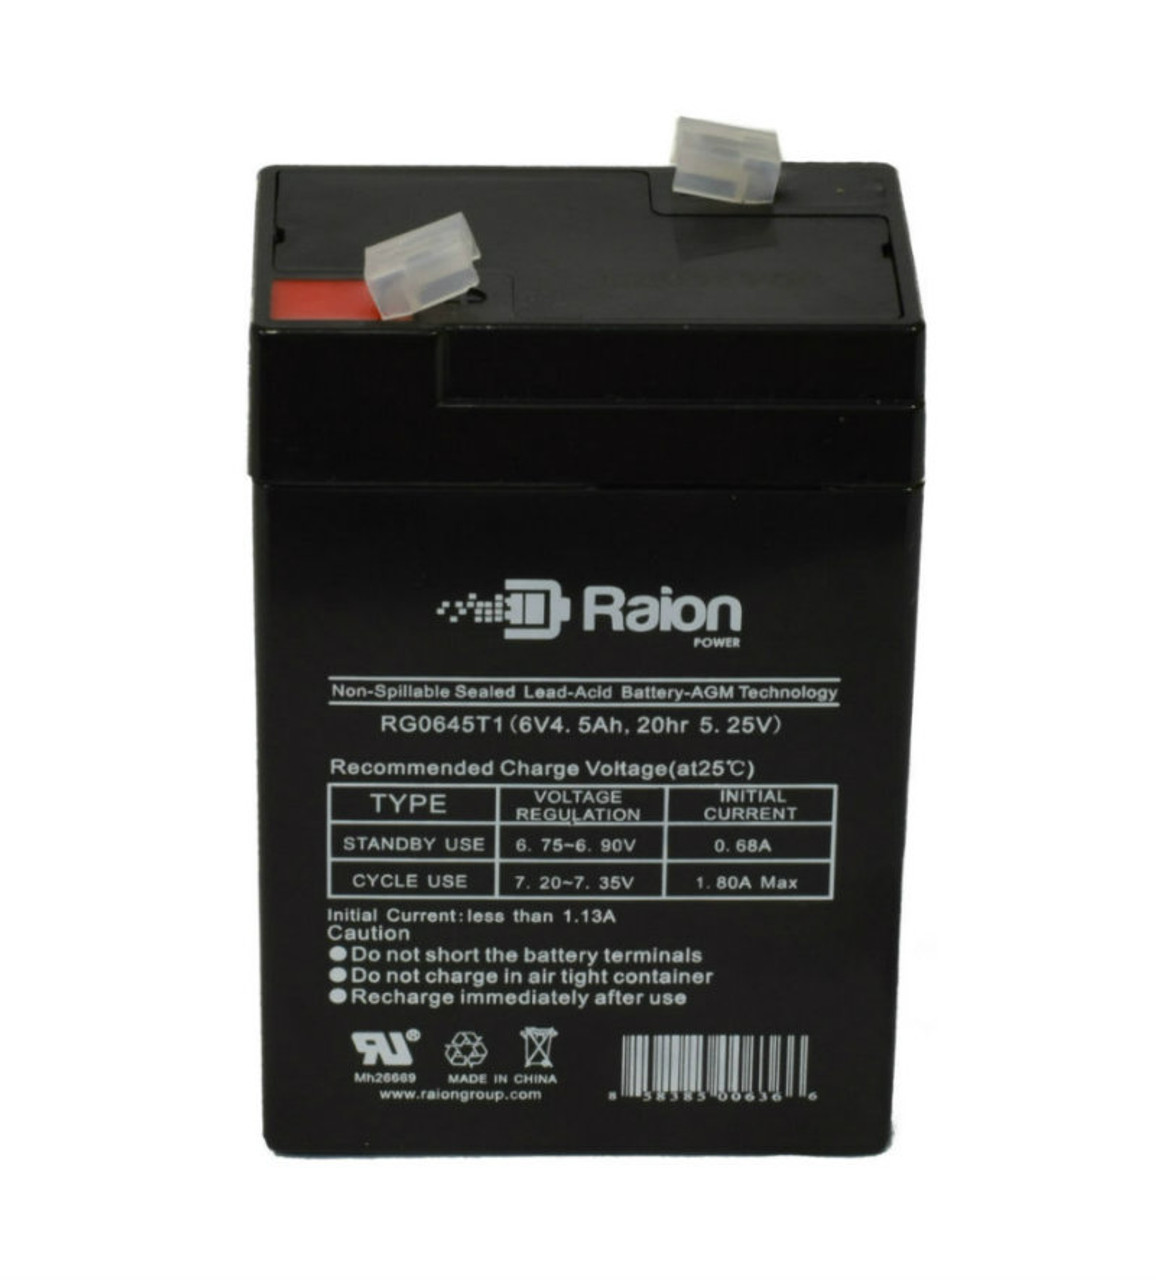 Raion Power RG0645T1 Replacement Battery Cartridge for Emergi-Lite WSMX14R